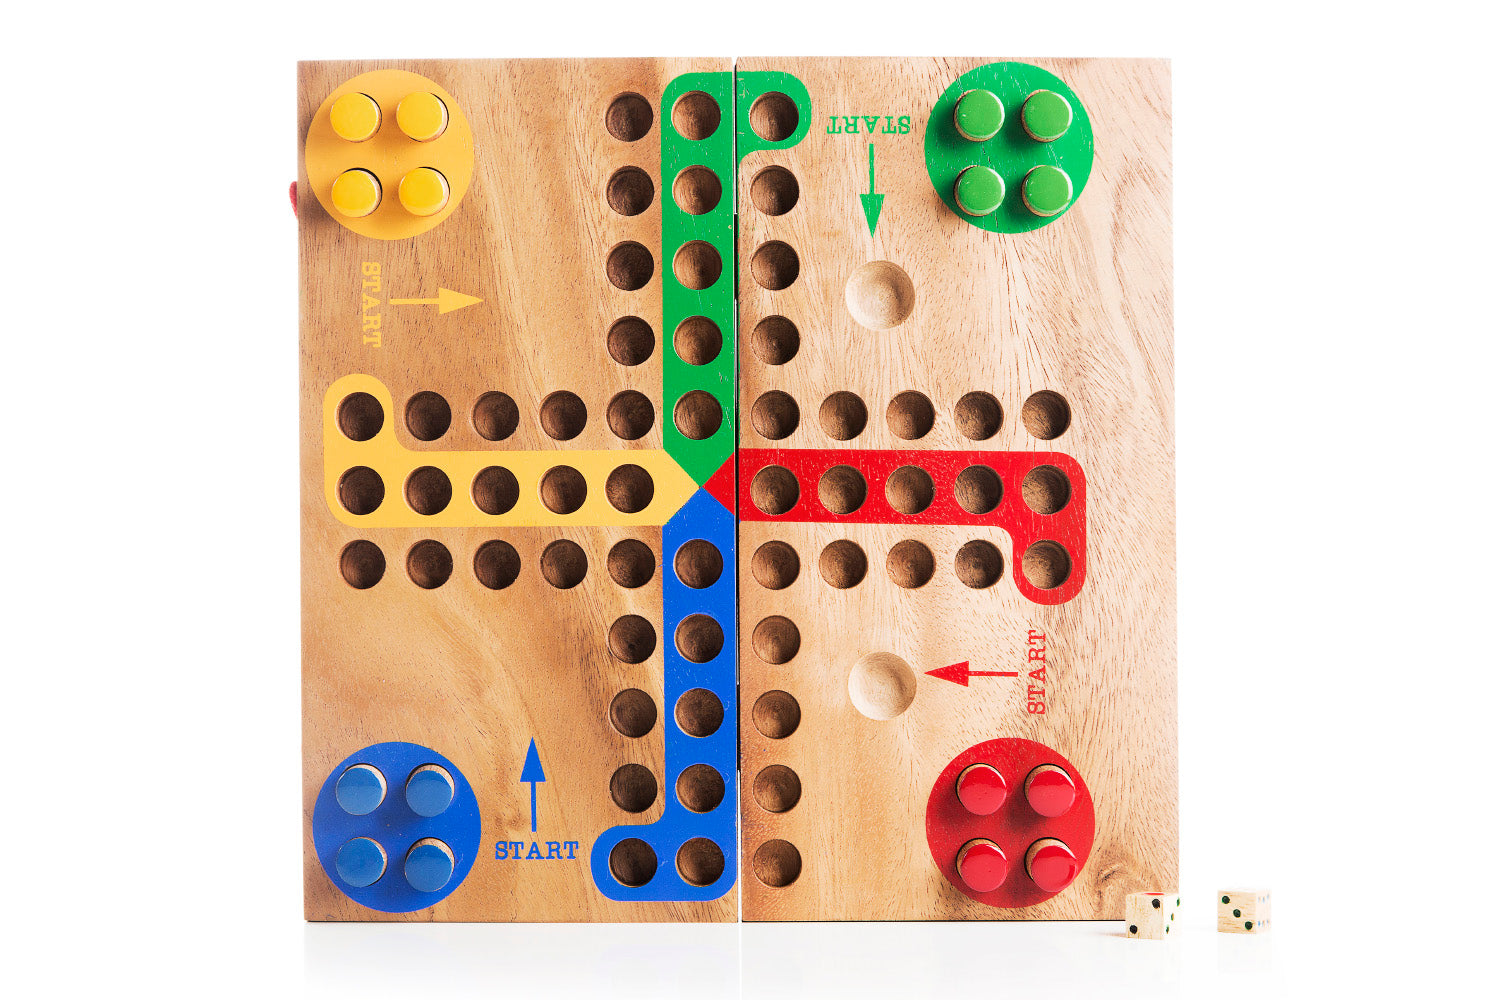 How to make a simple Ludo board game